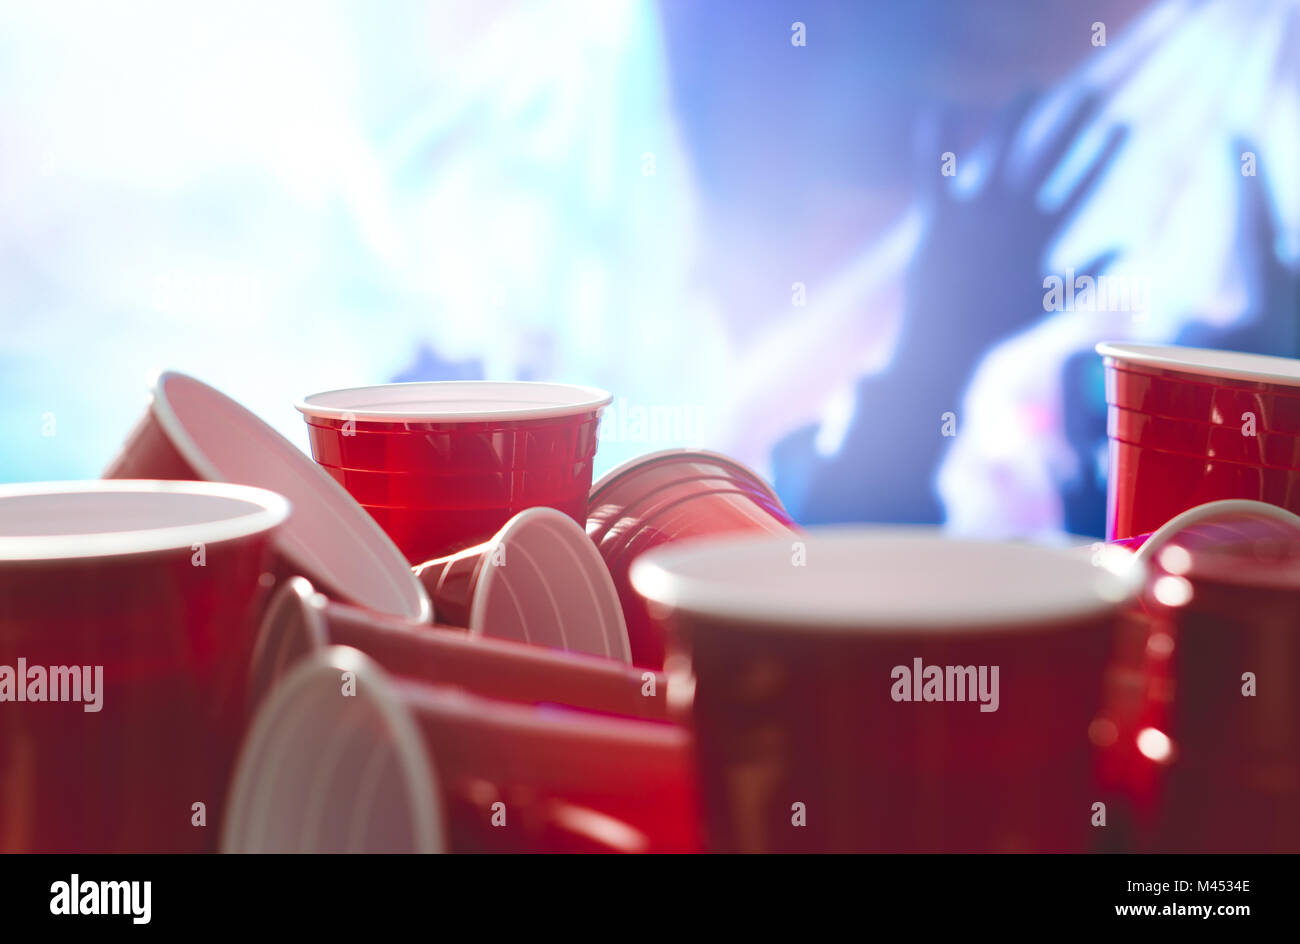 Many red party cups with blurred celebrating people in the background. College alcohol containers in mixed positions. Stock Photo